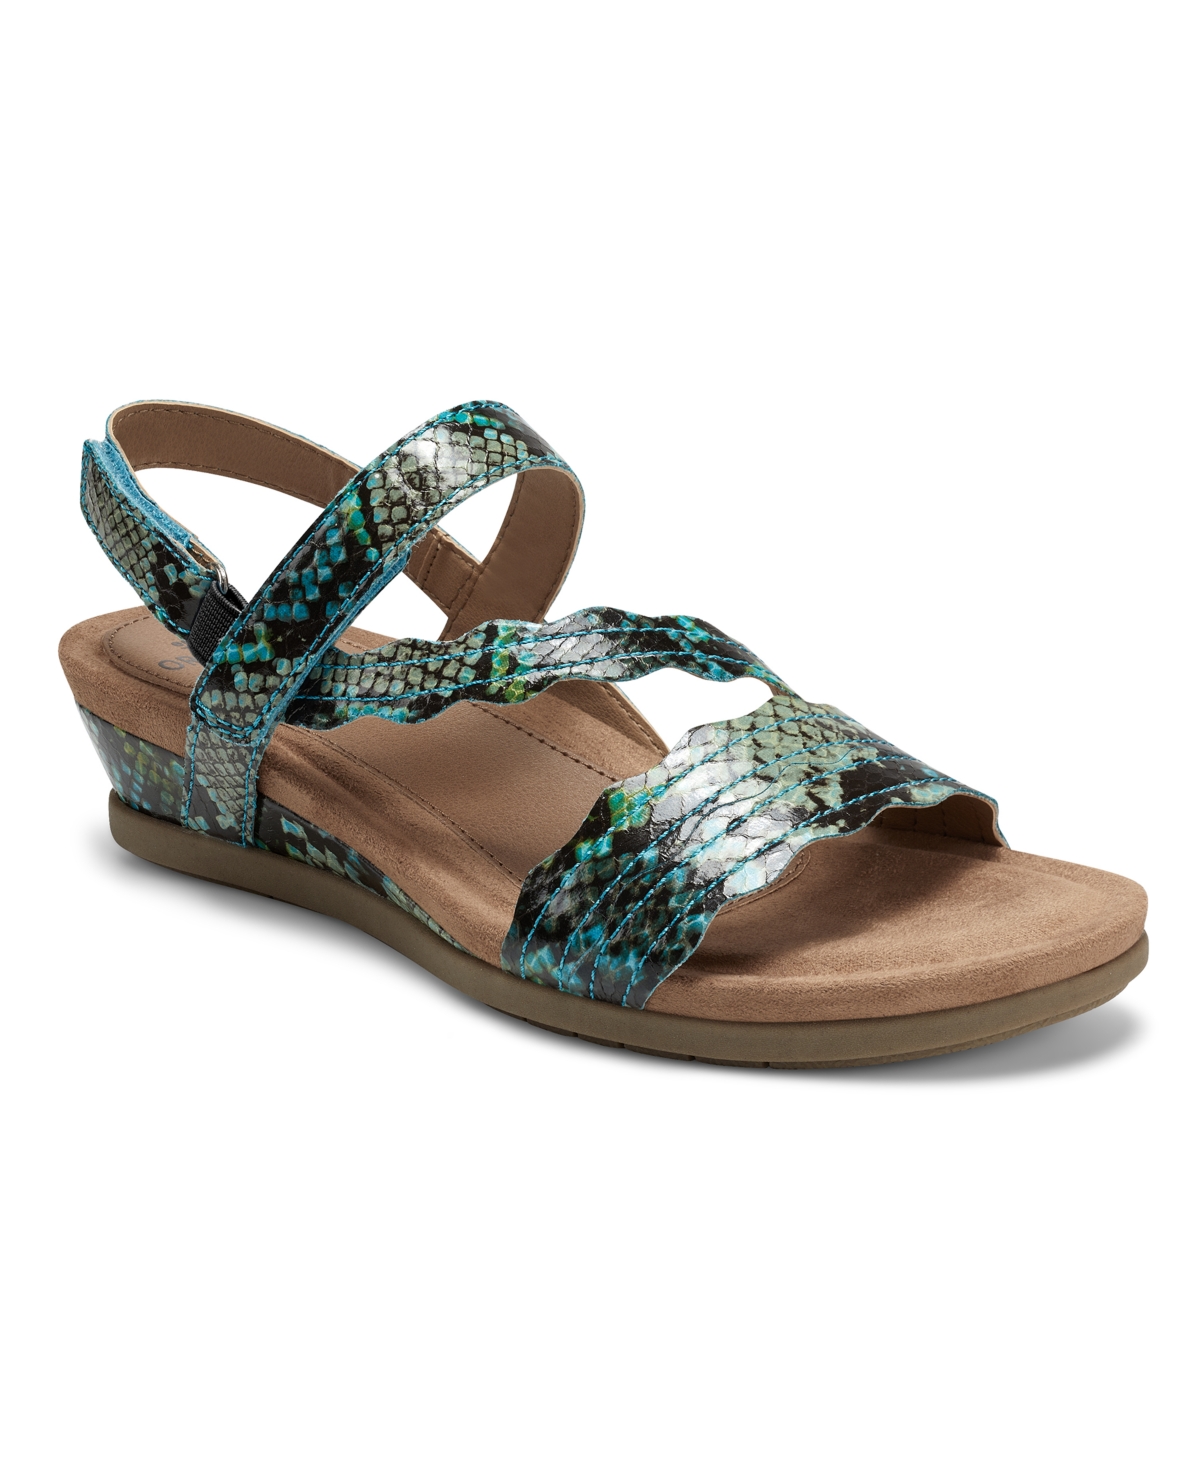 Earth Origins Women's Poppy Wedge Sandals Women's Shoes In Taupe Multi ...